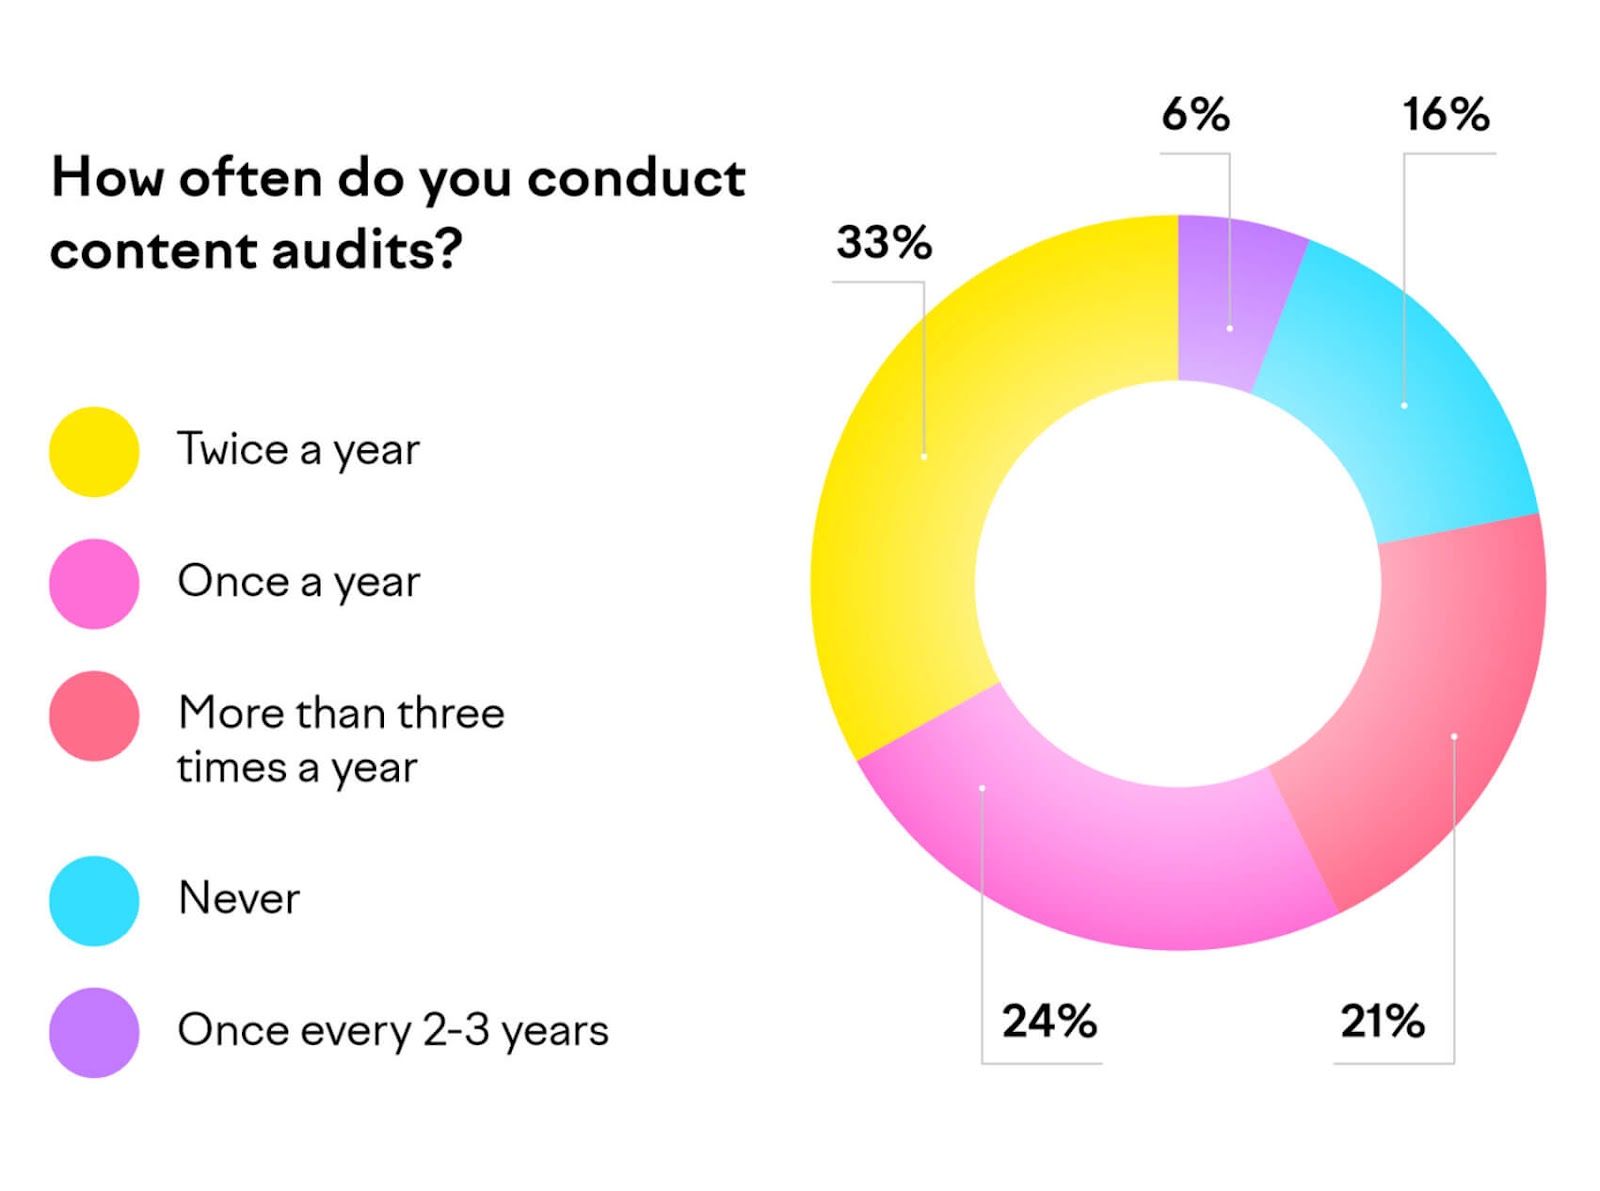 Colorful donut chart illustrating the frequency of content audits with a legend correlating colors to frequencies.